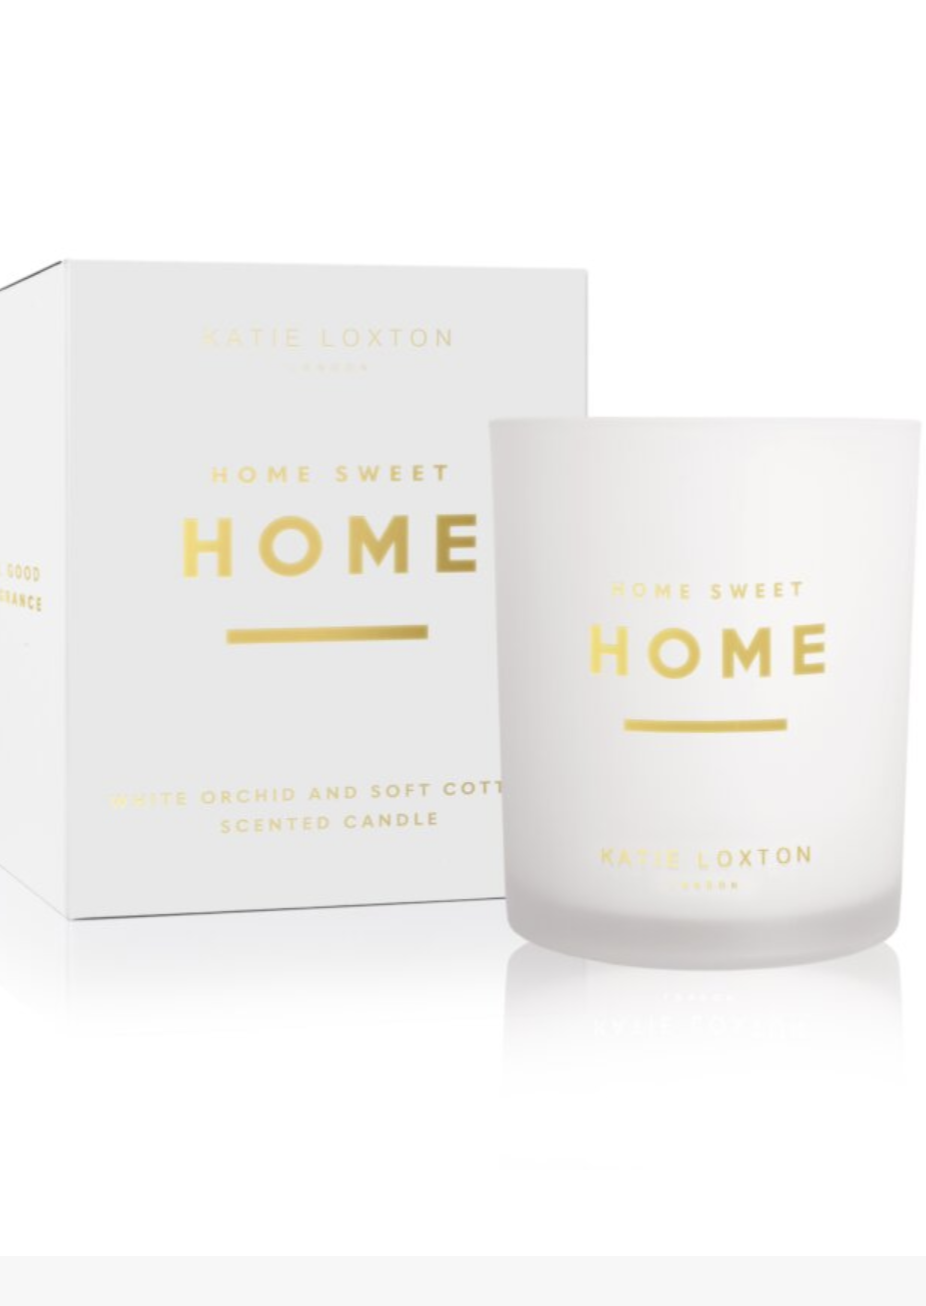 Home Sweet Home Scented Candle - FINAL SALE Home & Lifestyle